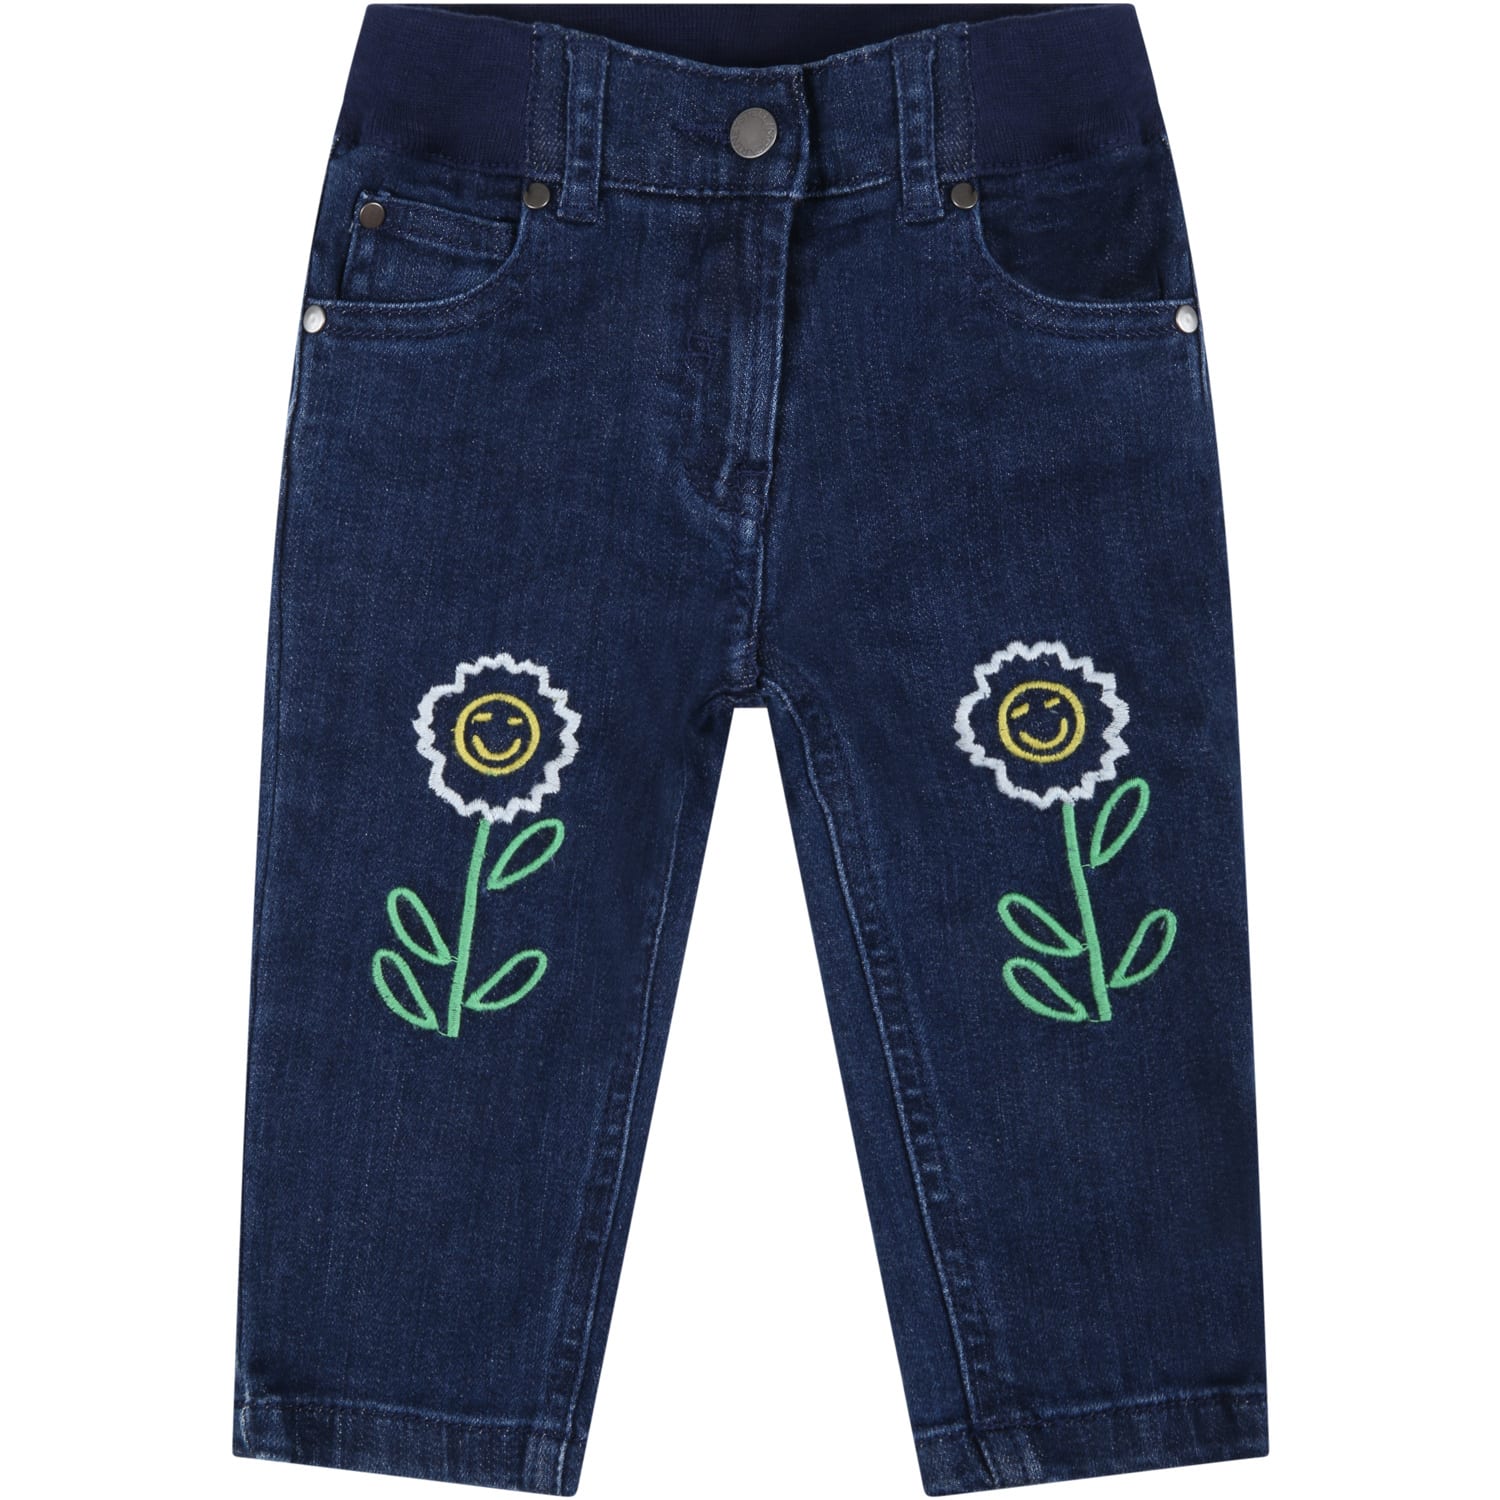 STELLA MCCARTNEY BLUE JEANS FOR BABYKIDS WITH DAISIES,603359 SRK67 4145